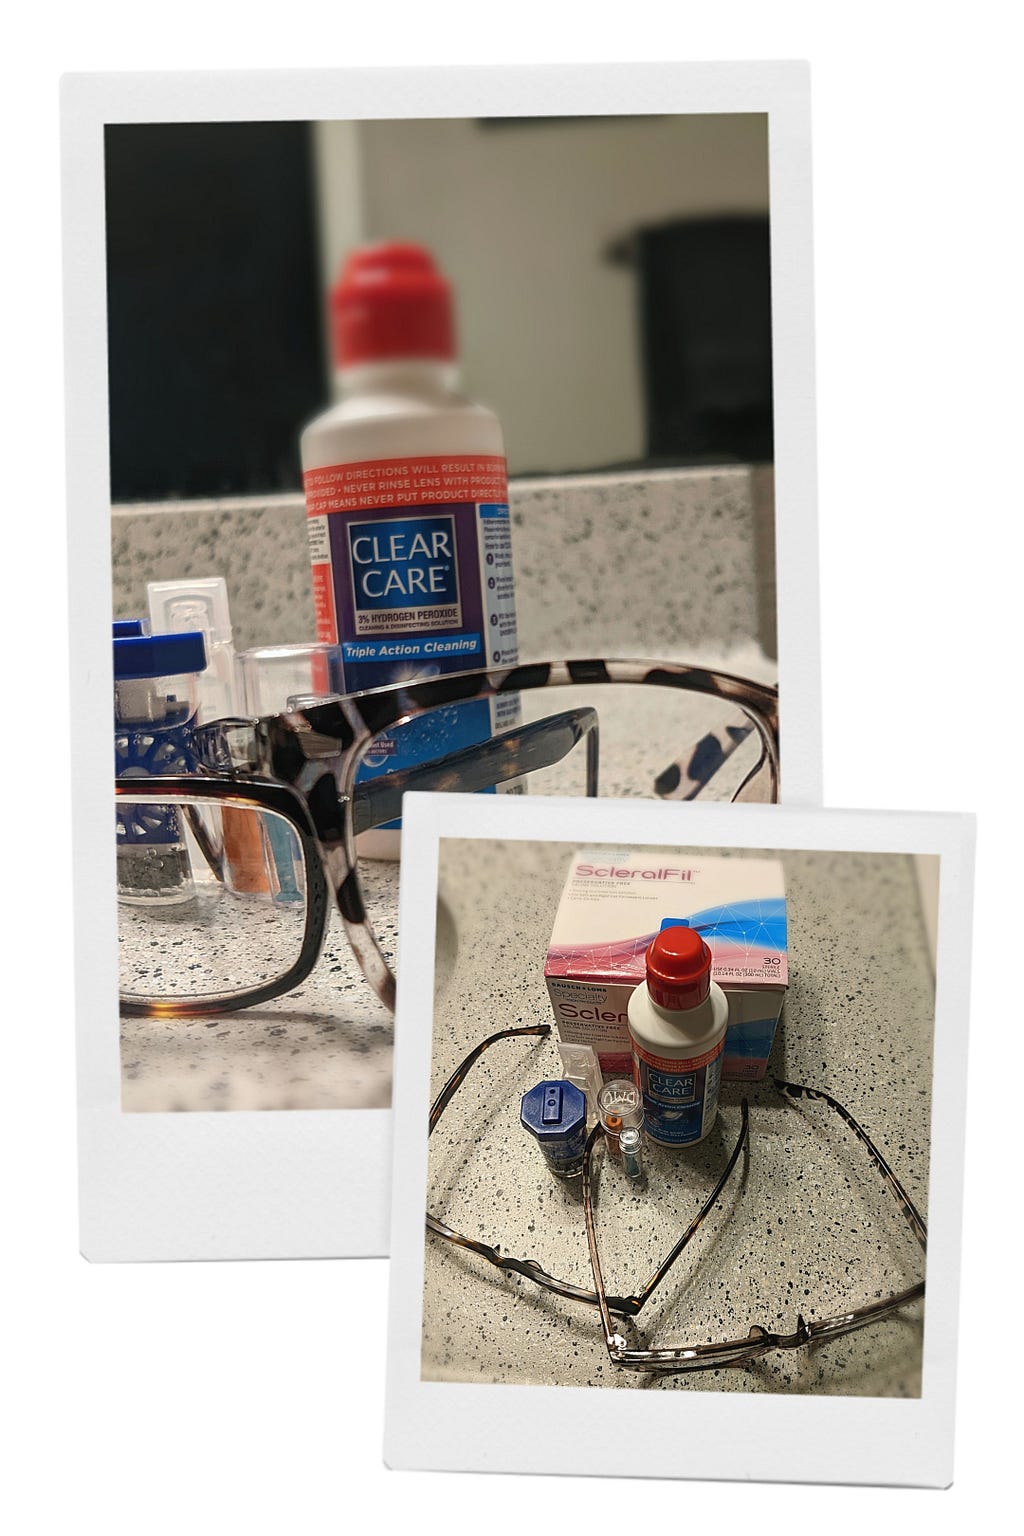 Scleral contacts/keratoconus care contents. This is everything I need to care for my eyes from this moment forward. My new glasses should be here early next week as my prescription has changed. I can’t wait to put those babies on! Photo Credit; Tremaine L. Loadholt